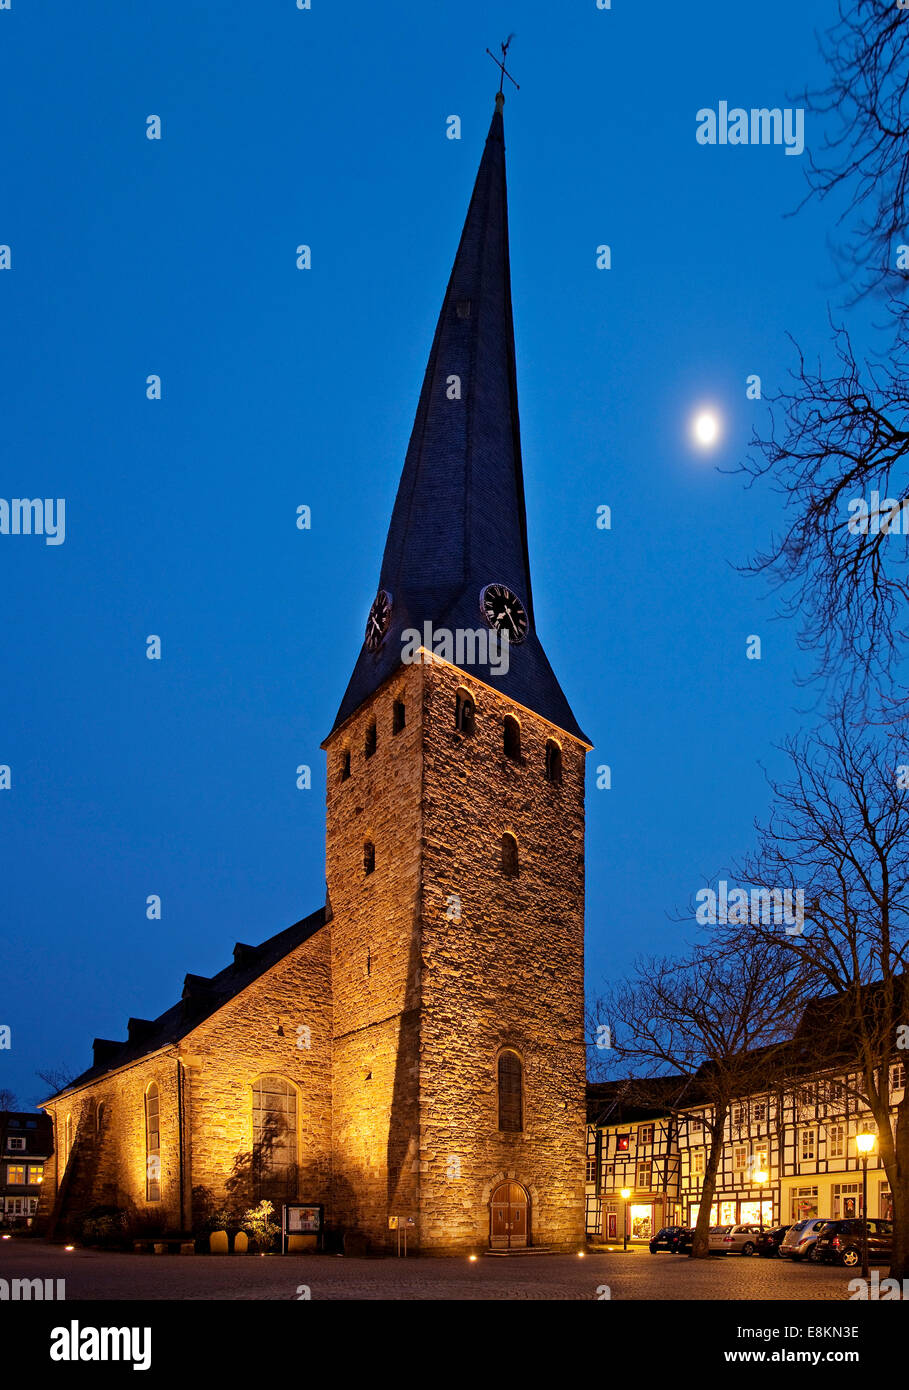 St. George's Church with leaning tower in the historic centre at dusk, Hattingen, Ruhr district, North Rhine-Westphalia, Germany Stock Photo